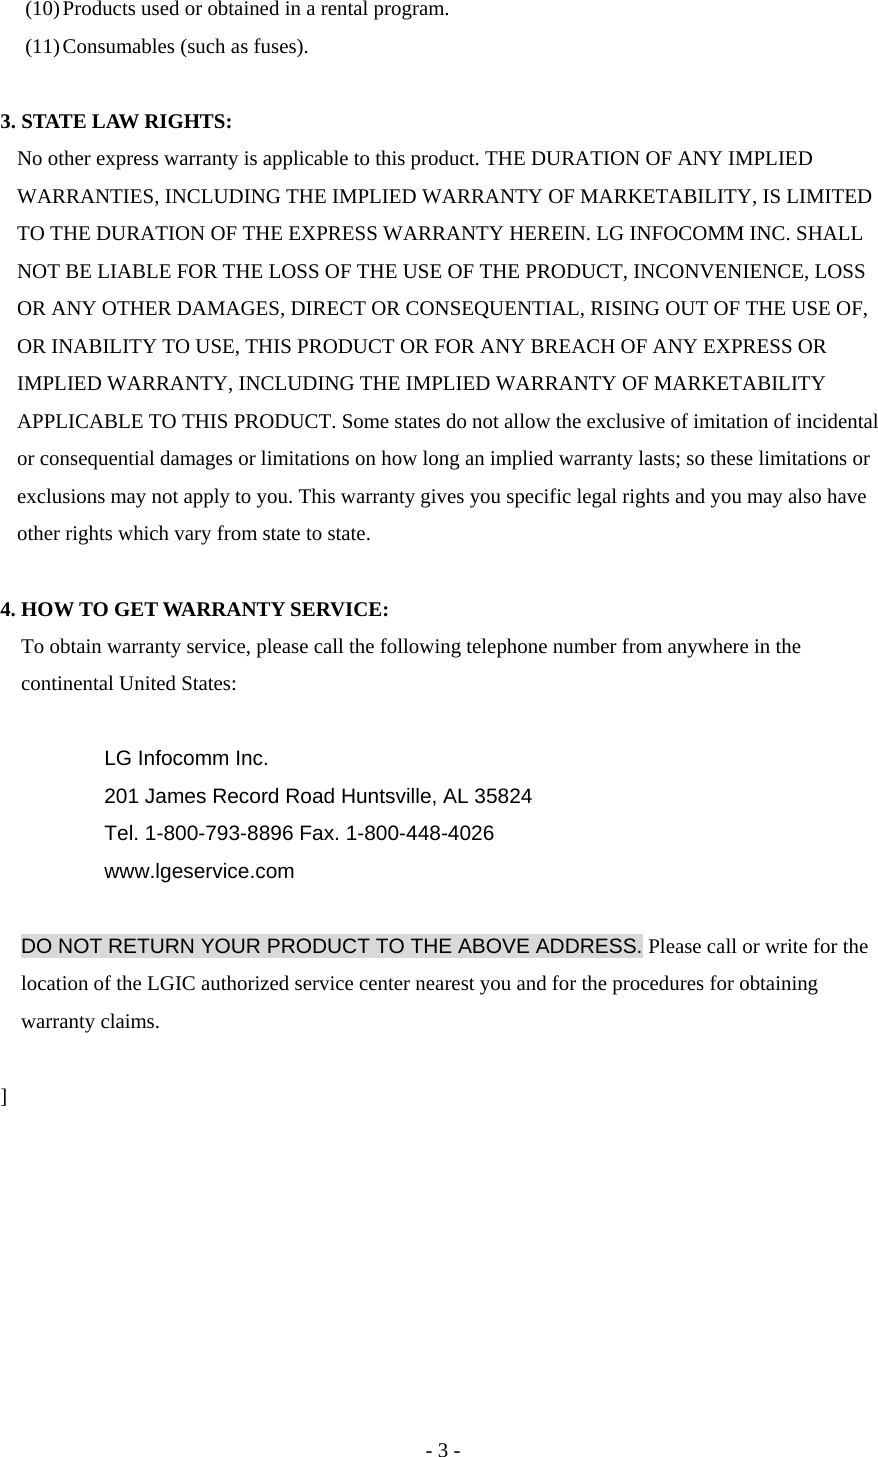 (10) Products used or obtained in a rental program. (11) Consumables (such as fuses).  3. STATE LAW RIGHTS: No other express warranty is applicable to this product. THE DURATION OF ANY IMPLIED WARRANTIES, INCLUDING THE IMPLIED WARRANTY OF MARKETABILITY, IS LIMITED TO THE DURATION OF THE EXPRESS WARRANTY HEREIN. LG INFOCOMM INC. SHALL NOT BE LIABLE FOR THE LOSS OF THE USE OF THE PRODUCT, INCONVENIENCE, LOSS OR ANY OTHER DAMAGES, DIRECT OR CONSEQUENTIAL, RISING OUT OF THE USE OF, OR INABILITY TO USE, THIS PRODUCT OR FOR ANY BREACH OF ANY EXPRESS OR IMPLIED WARRANTY, INCLUDING THE IMPLIED WARRANTY OF MARKETABILITY APPLICABLE TO THIS PRODUCT. Some states do not allow the exclusive of imitation of incidental or consequential damages or limitations on how long an implied warranty lasts; so these limitations or exclusions may not apply to you. This warranty gives you specific legal rights and you may also have other rights which vary from state to state.  4. HOW TO GET WARRANTY SERVICE: To obtain warranty service, please call the following telephone number from anywhere in the continental United States:  LG Infocomm Inc. 201 James Record Road Huntsville, AL 35824 Tel. 1-800-793-8896 Fax. 1-800-448-4026 www.lgeservice.com  DO NOT RETURN YOUR PRODUCT TO THE ABOVE ADDRESS. Please call or write for the location of the LGIC authorized service center nearest you and for the procedures for obtaining warranty claims.  ]       - 3 - 